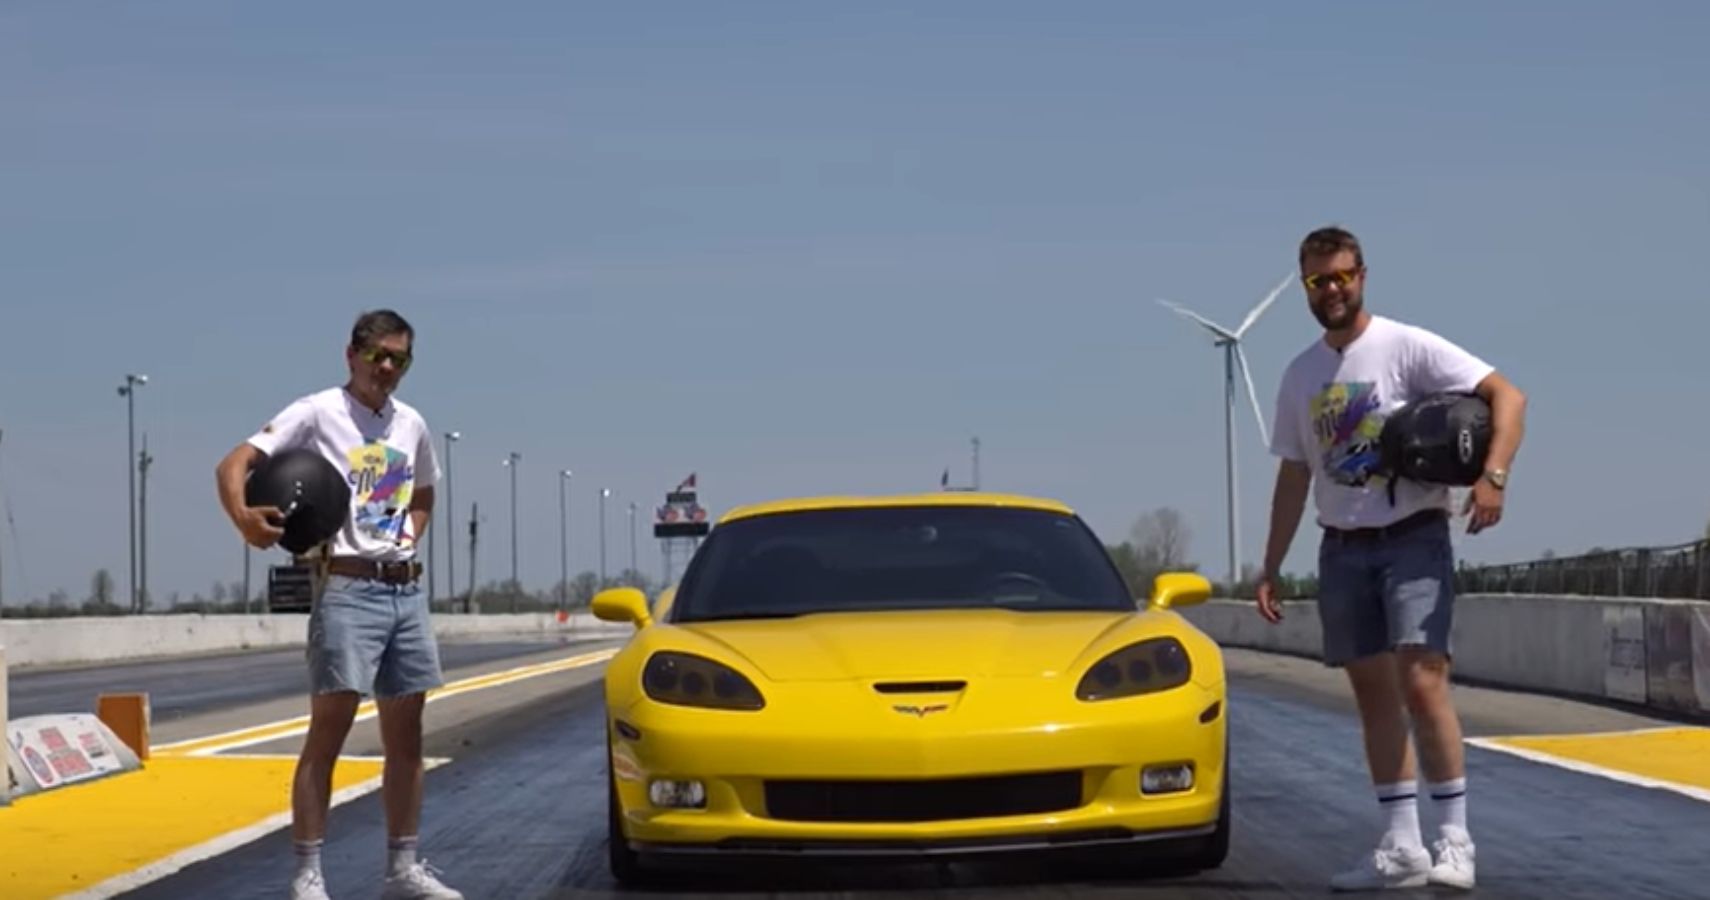 2006 Yellow C6 Chevrolet Corvette Z06 at the drag strip with TheStraightPipes